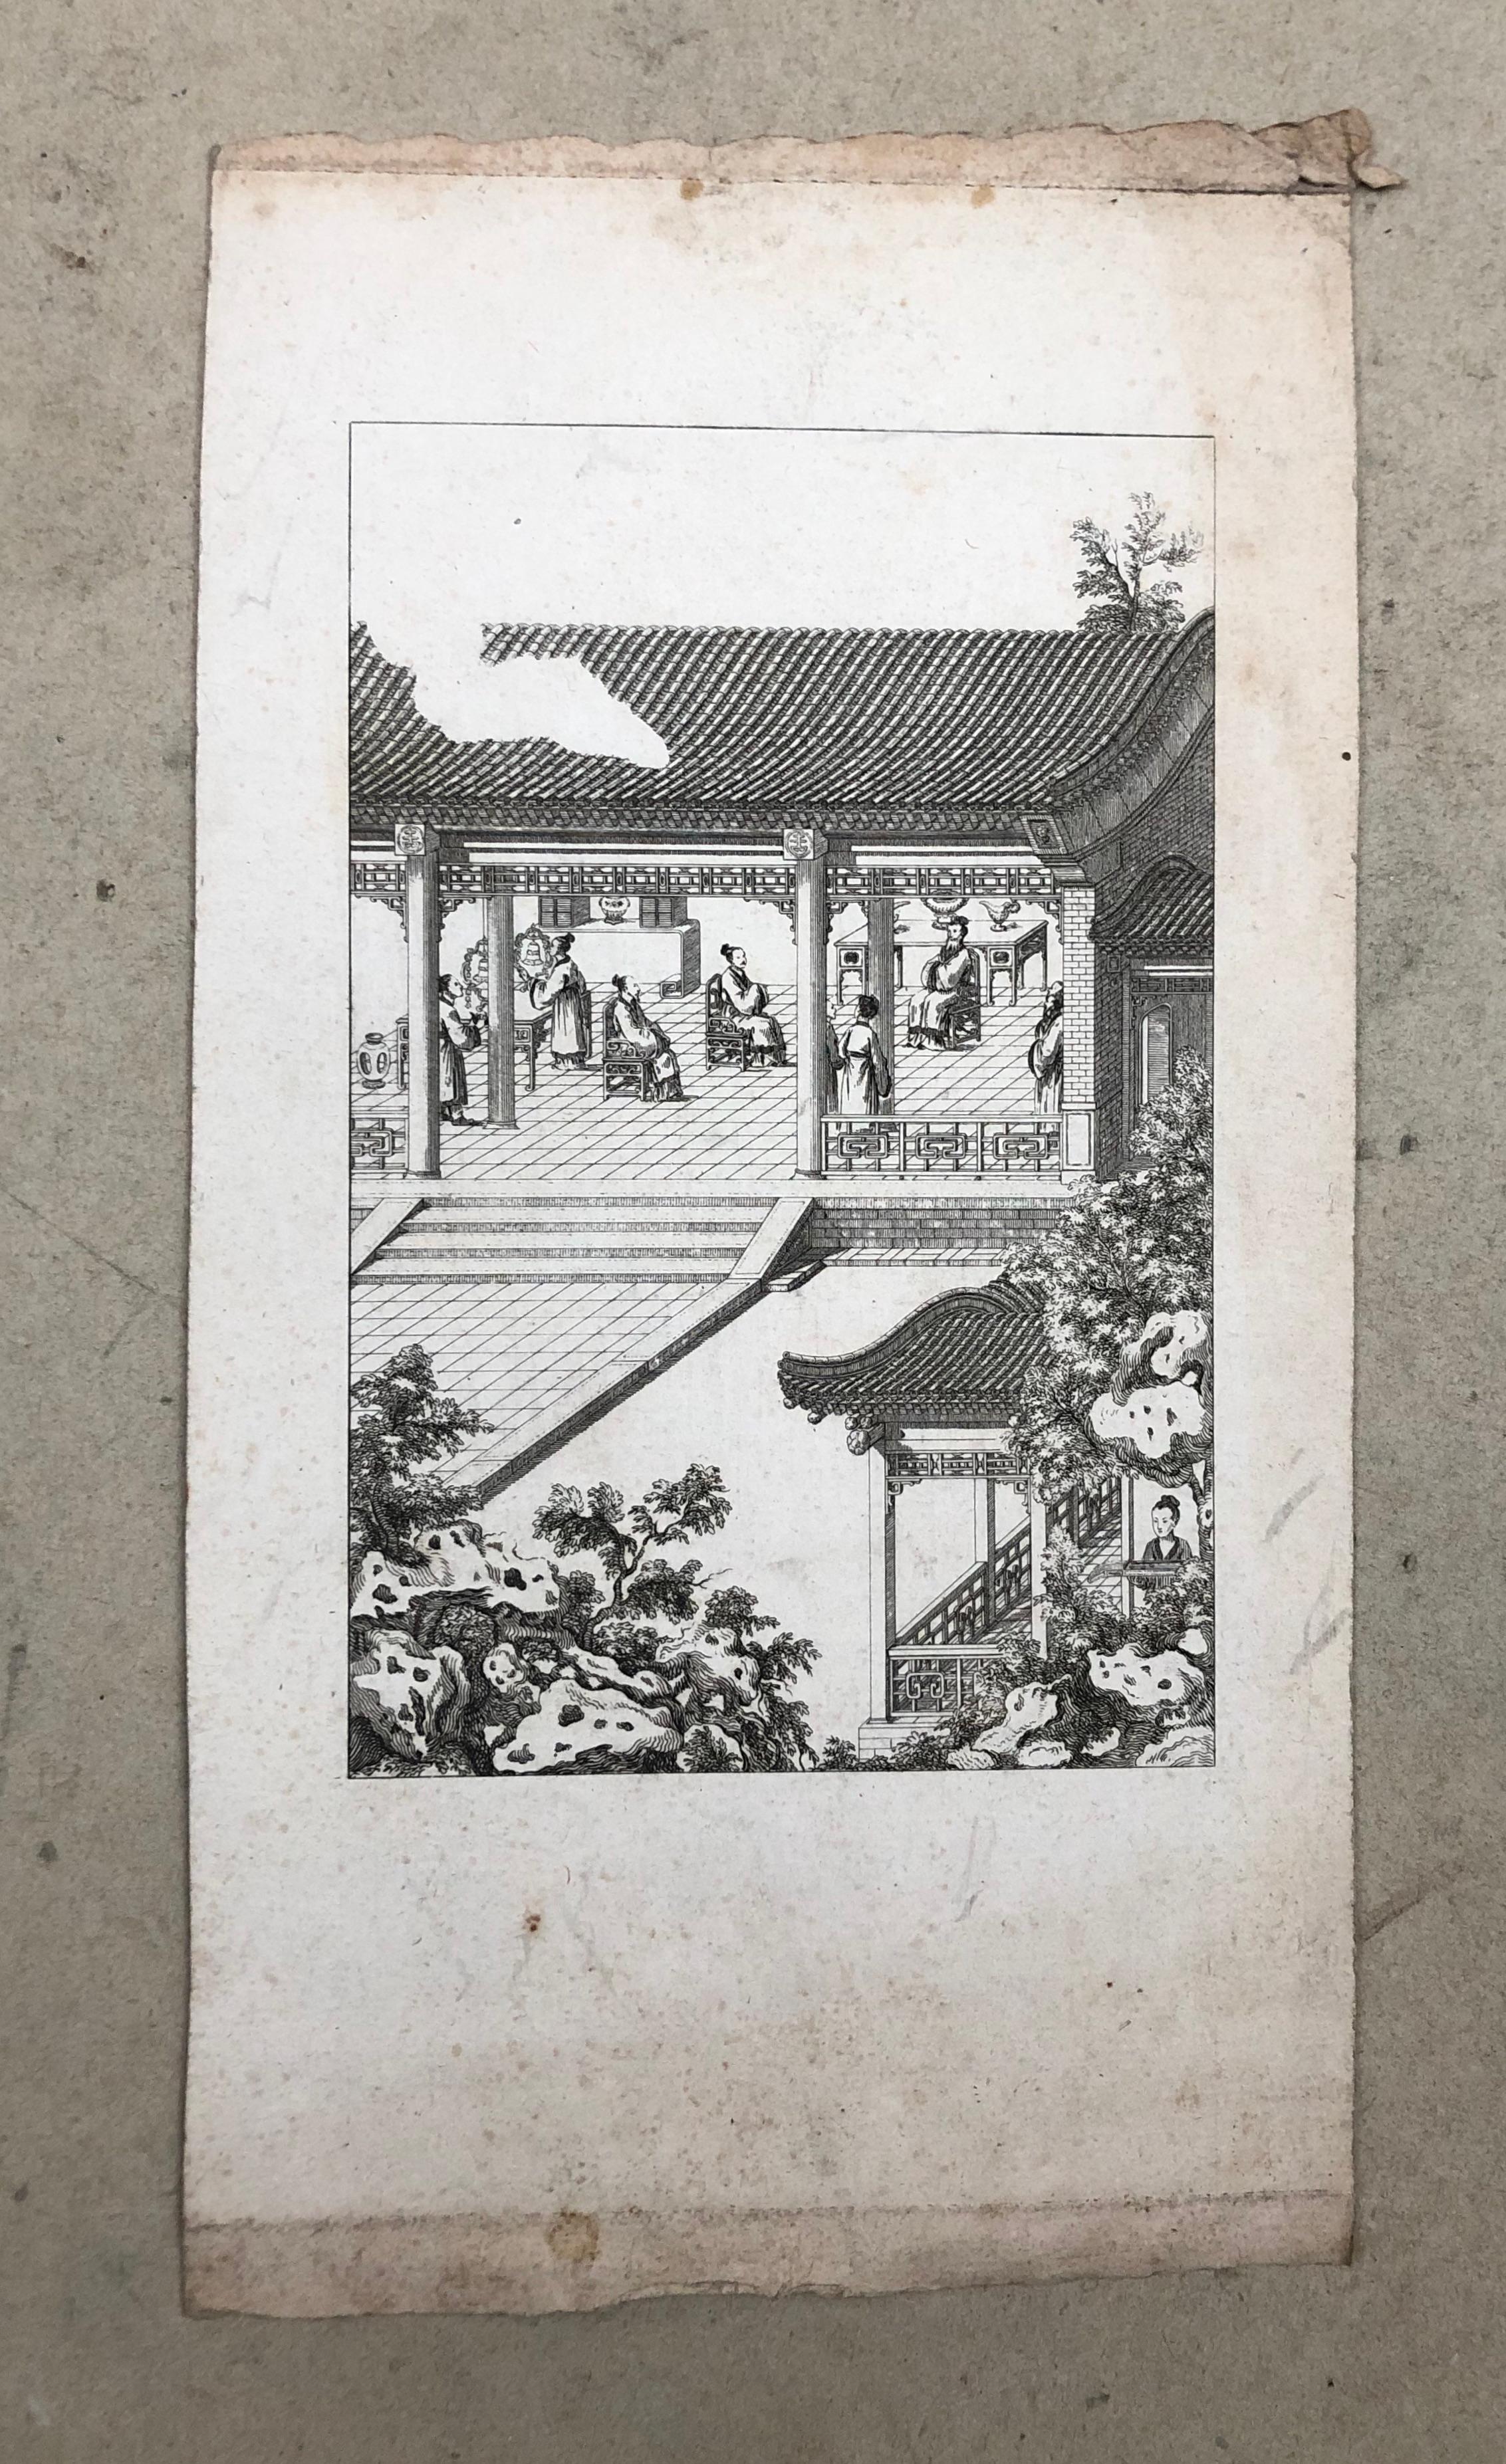 Scenes from Chinese life.
6 engravings from the end of the 18th century or the beginning of the 19th century.
Spots and freckles.
Folds or small tears in the margins for some plates.
From 24 x 17 cm to 30 x 16 cm